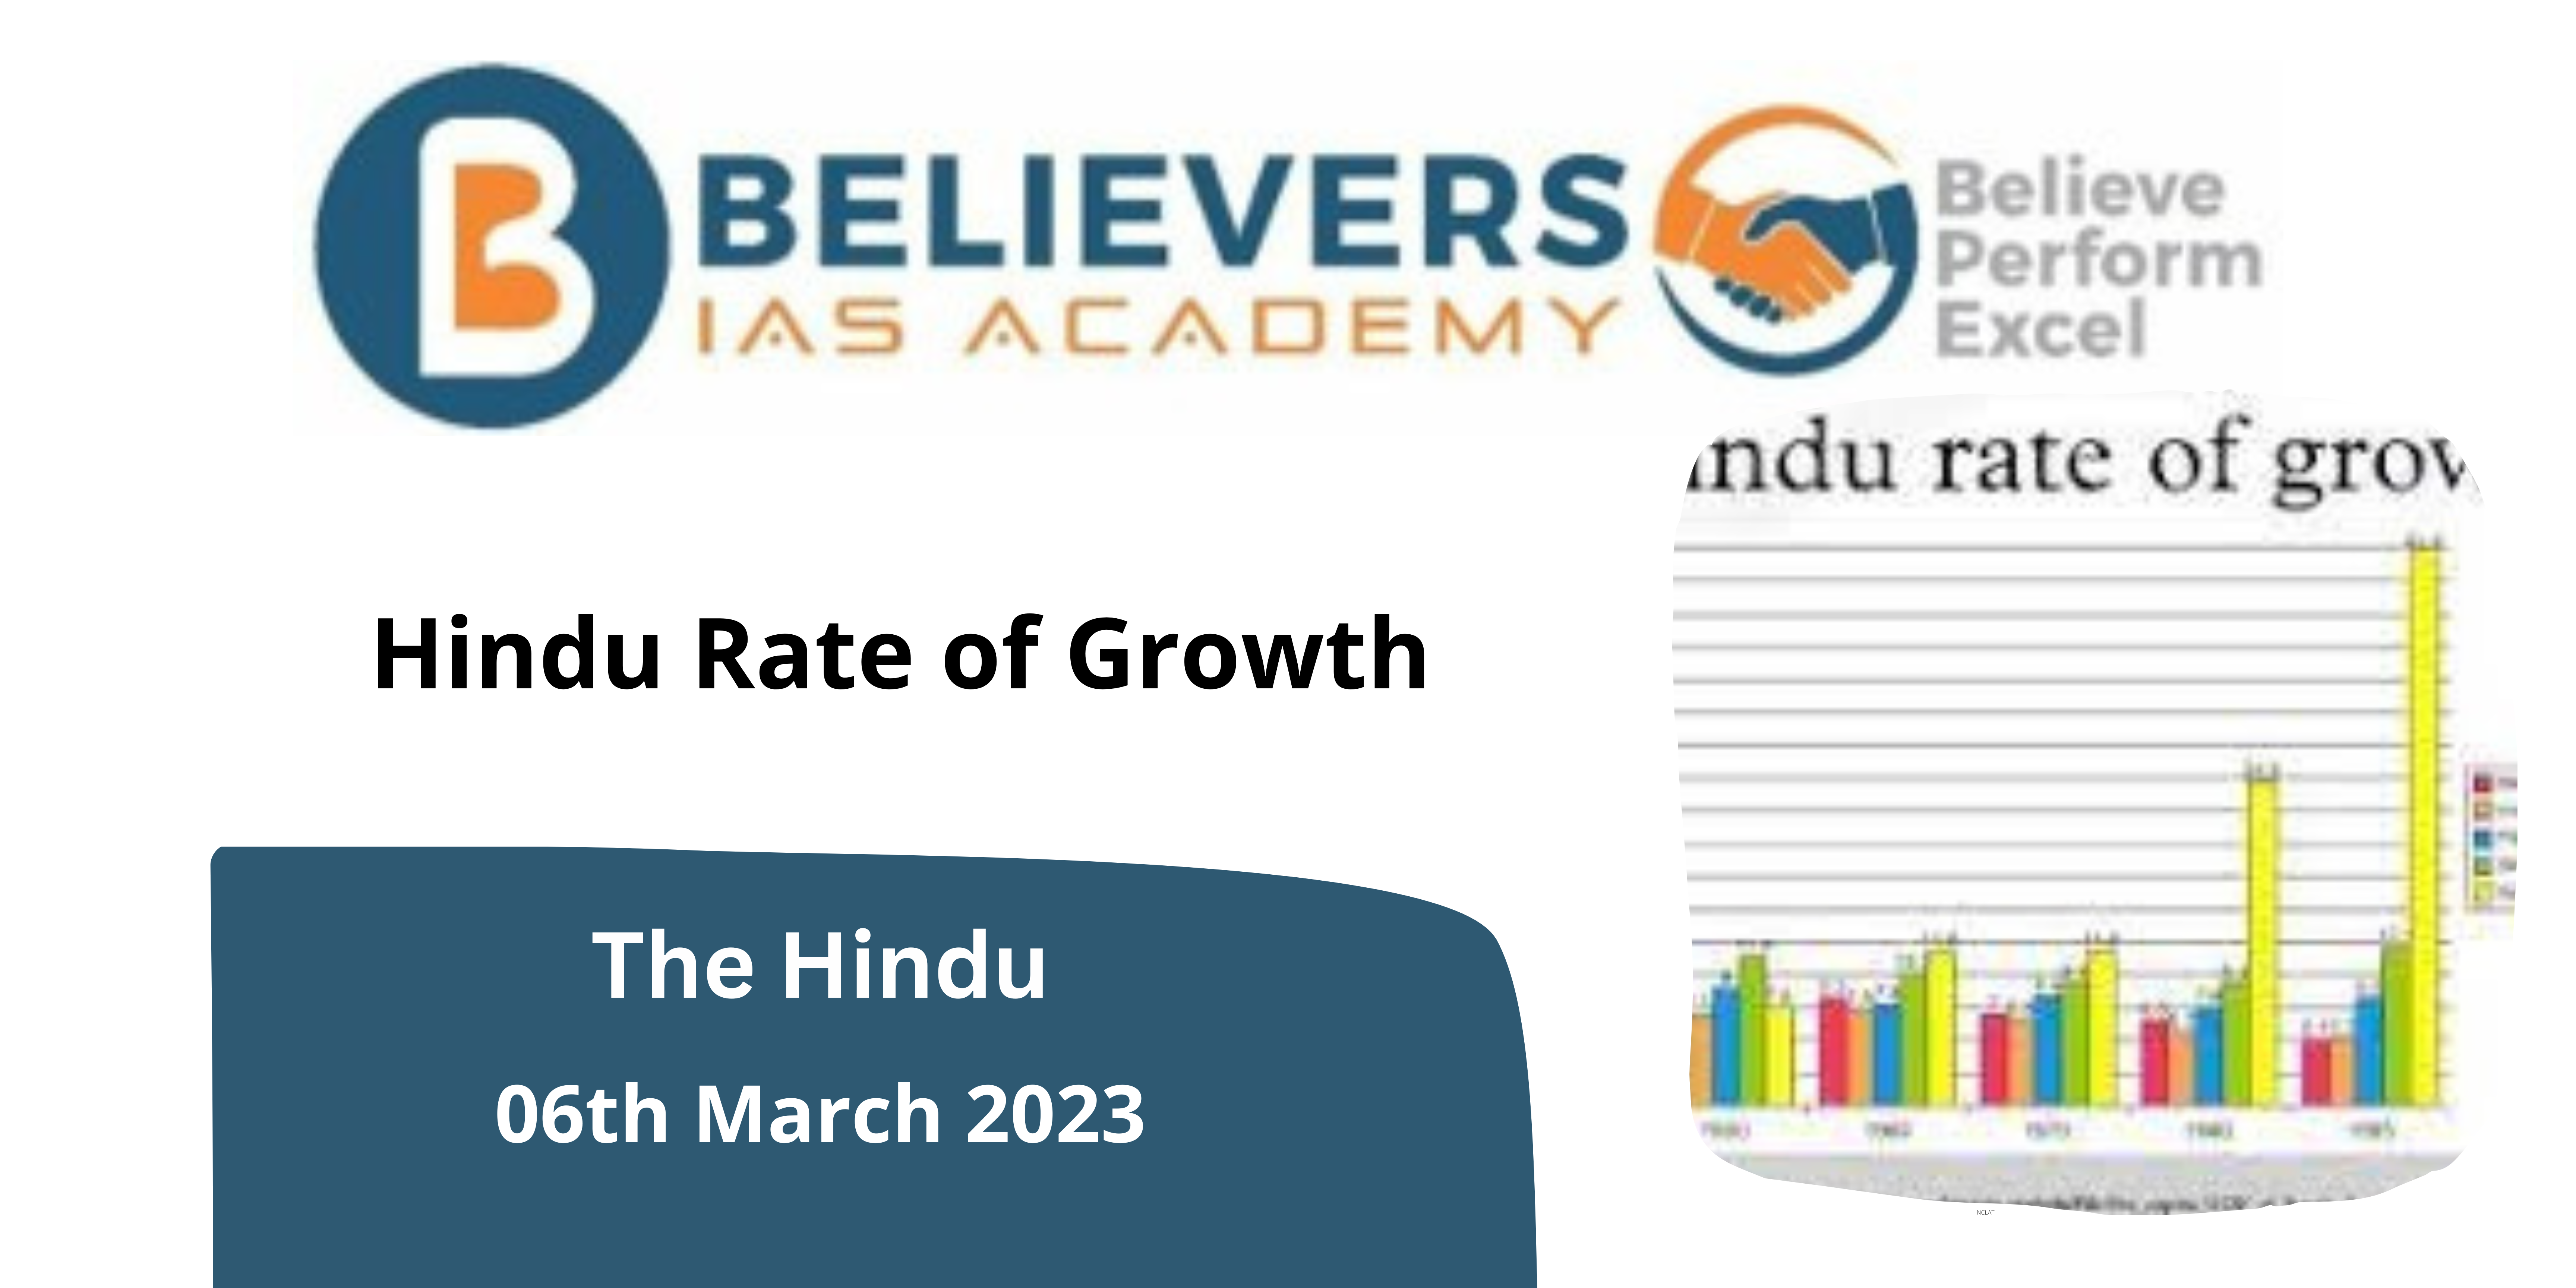 Hindu Rate of Growth